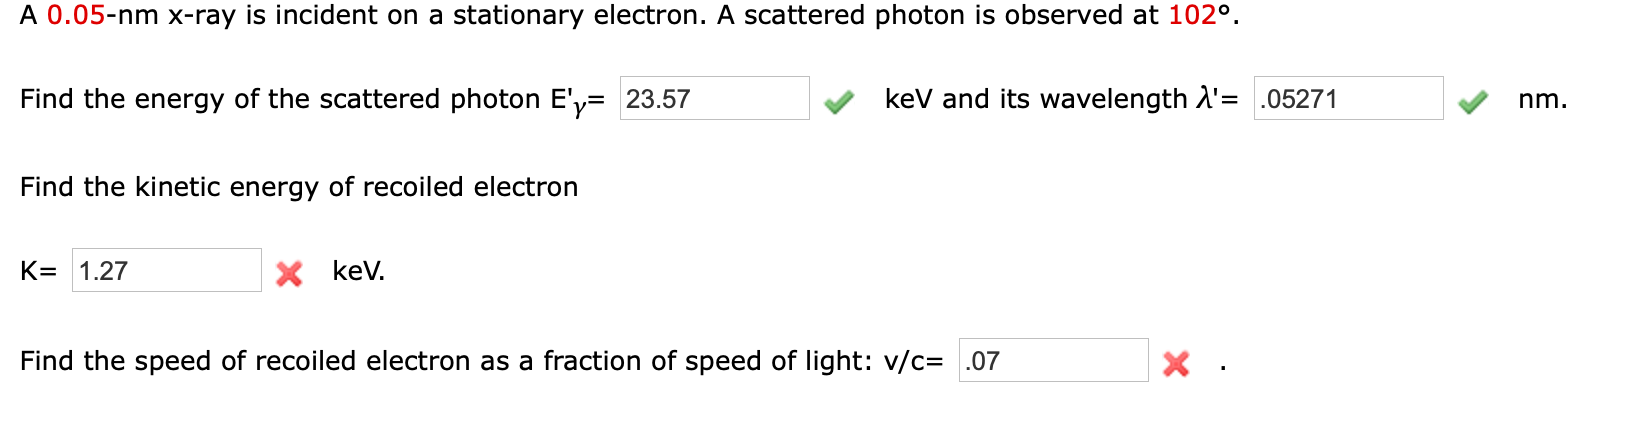 A 0.05-nm x-ray is incident on a stationary electron. A scattered photon is observed at 102°.
Find the energy of the scattered photon E'y= 23.57
kev and its wavelength A'= .05271
nm.
Find the kinetic energy of recoiled electron
K= 1.27
X kev.
Find the speed of recoiled electron as a fraction of speed of light: v/c= .07
